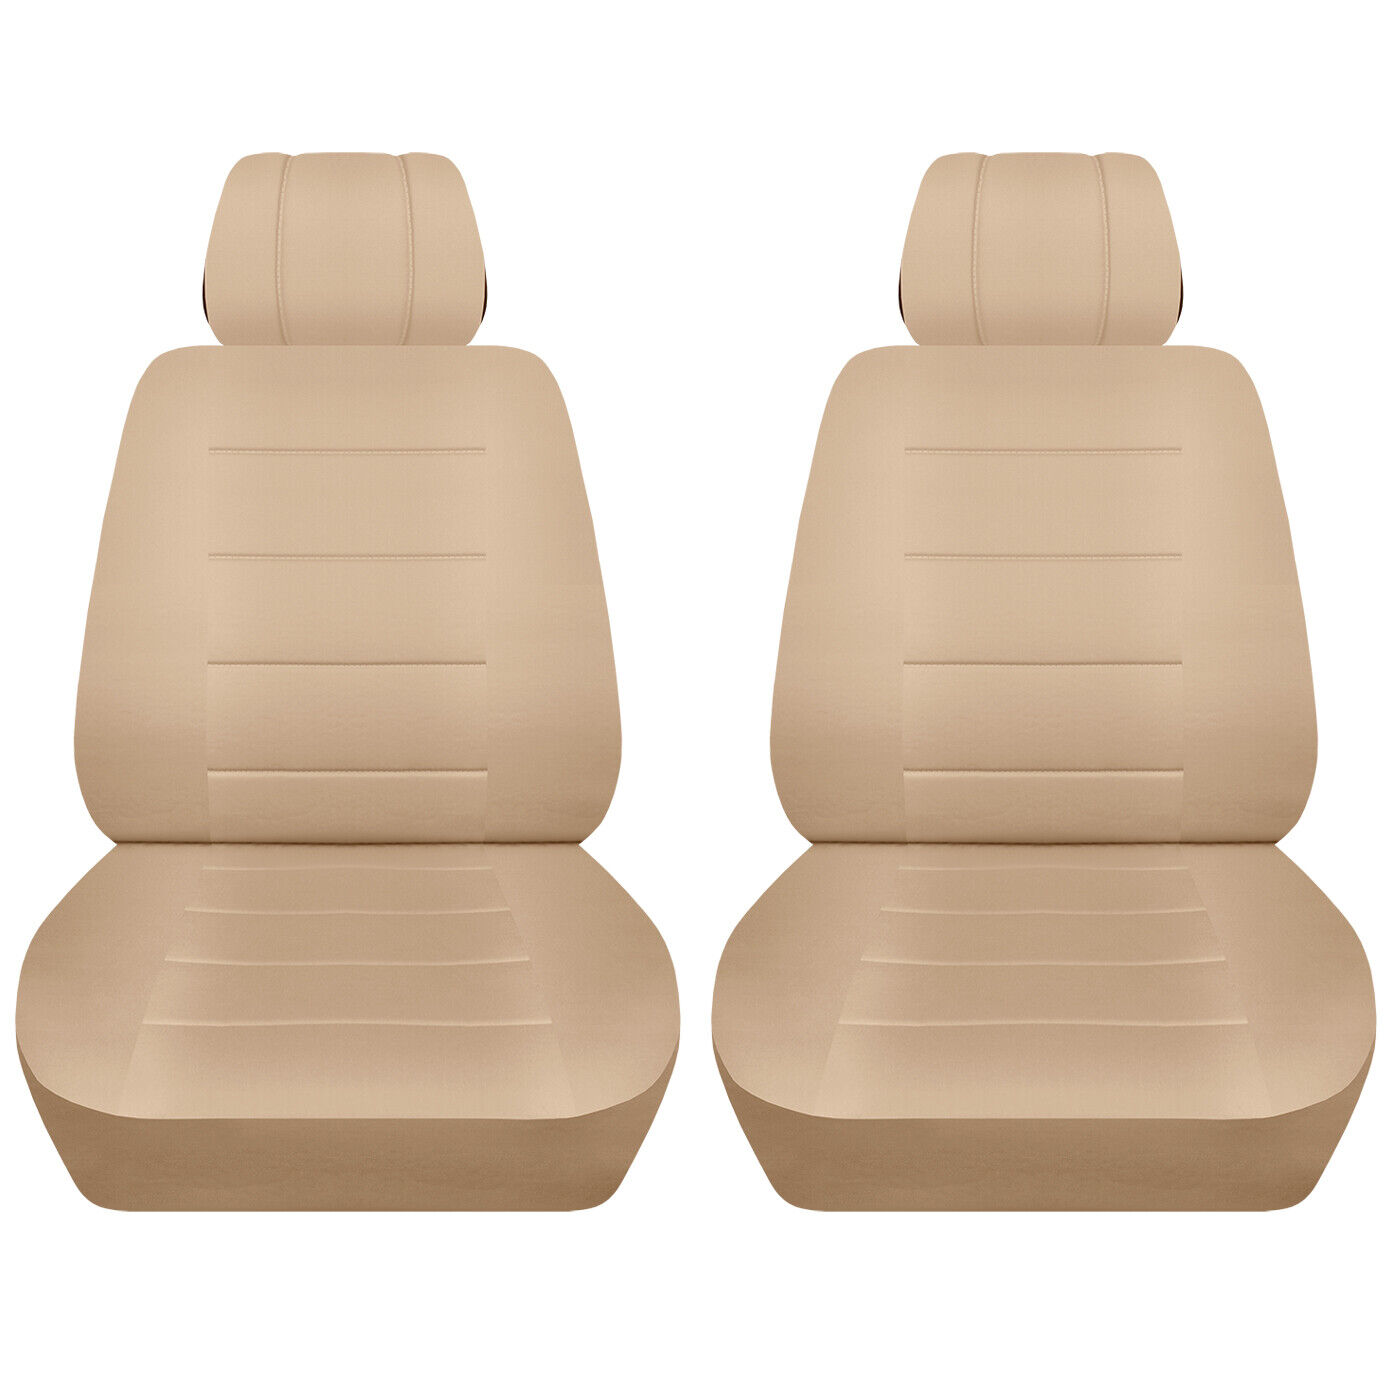 Two Front Seat Covers Fits 2006 - 2011 Volkswagen Beetle Solid Color Seat Covers